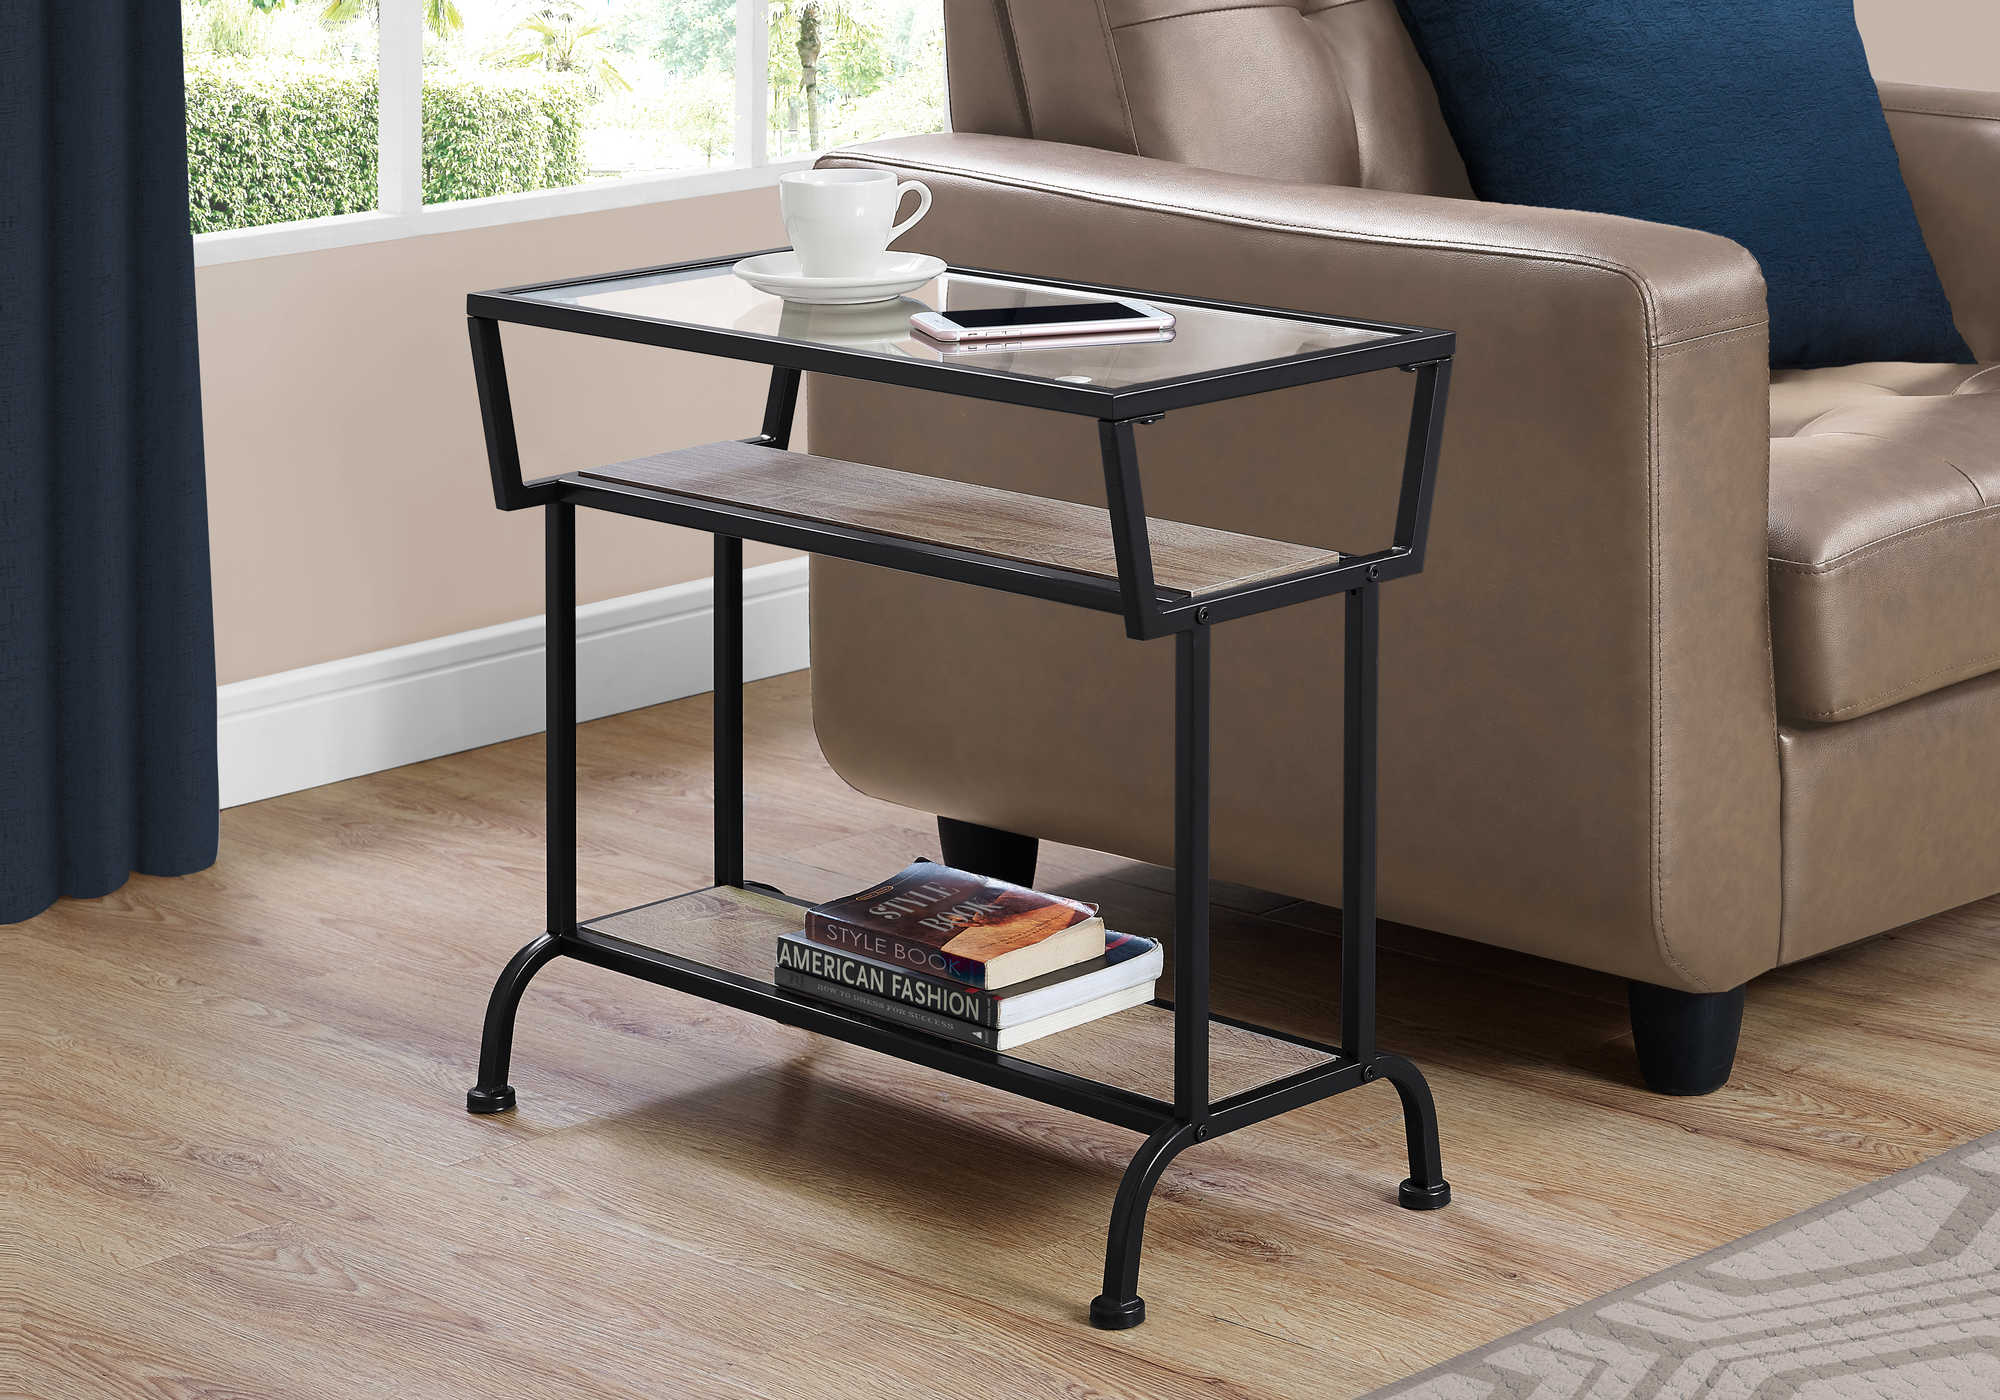 ACCENT TABLE - 22"H / DARK TAUPE / BLACK / TEMPERED GLASS